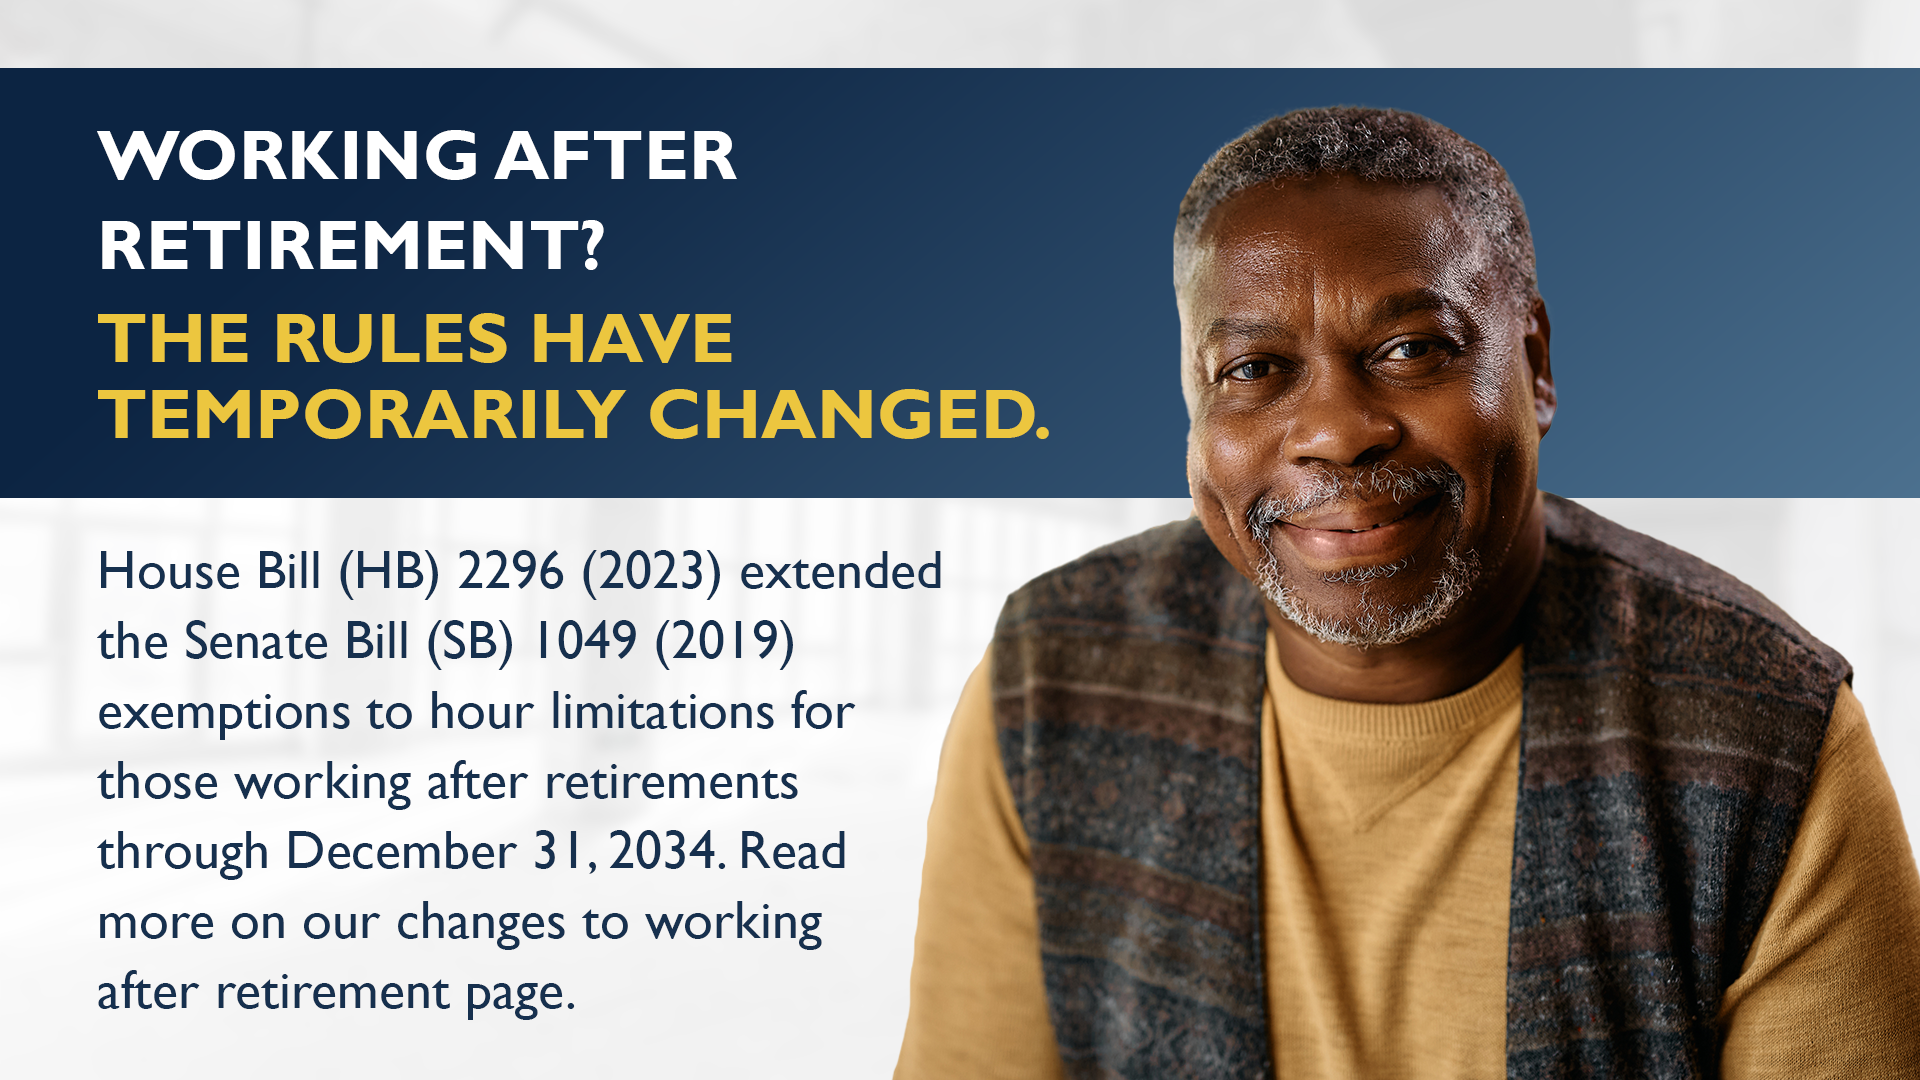 Image text: Working after retirement? THe rules have temporarily changed. House Bill (HB) 2296 (2023) extended the Senate Bill (SB) 1049 (2019) exemptions to hour limitations for those working after retirements through December 21, 2034. Read more on our changes to working after retirement age.